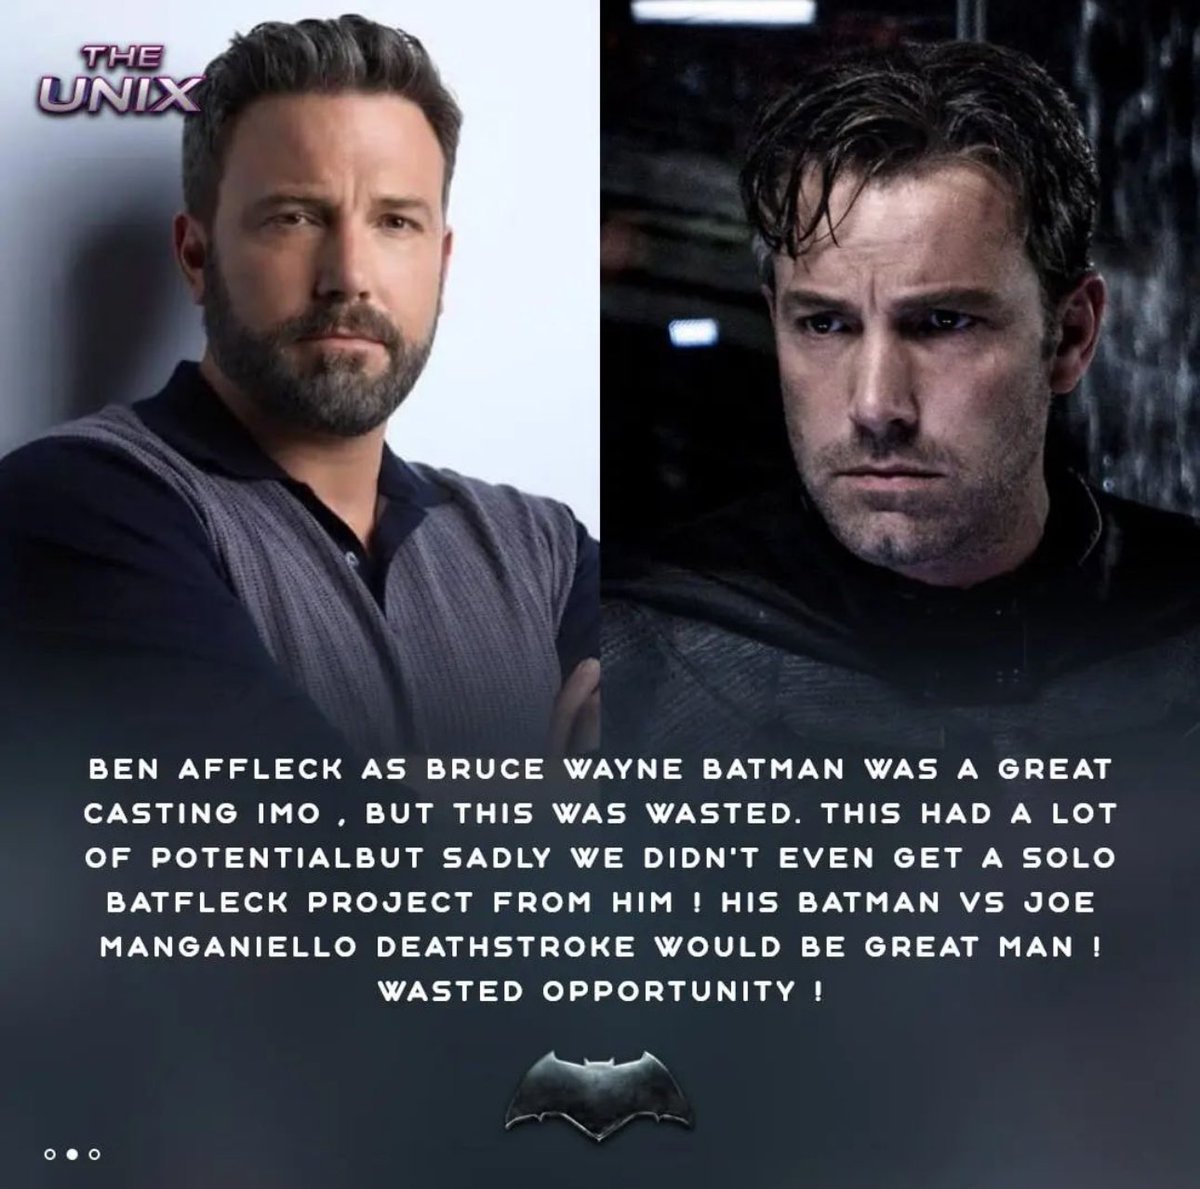 I absolutely agree and believe @BenAffleck needs a solo film! I don’t believe any Batman fan can say another Batman film is the best when an un-made solo Batfleck film still casts a dark shadow on the Bat franchise 💯